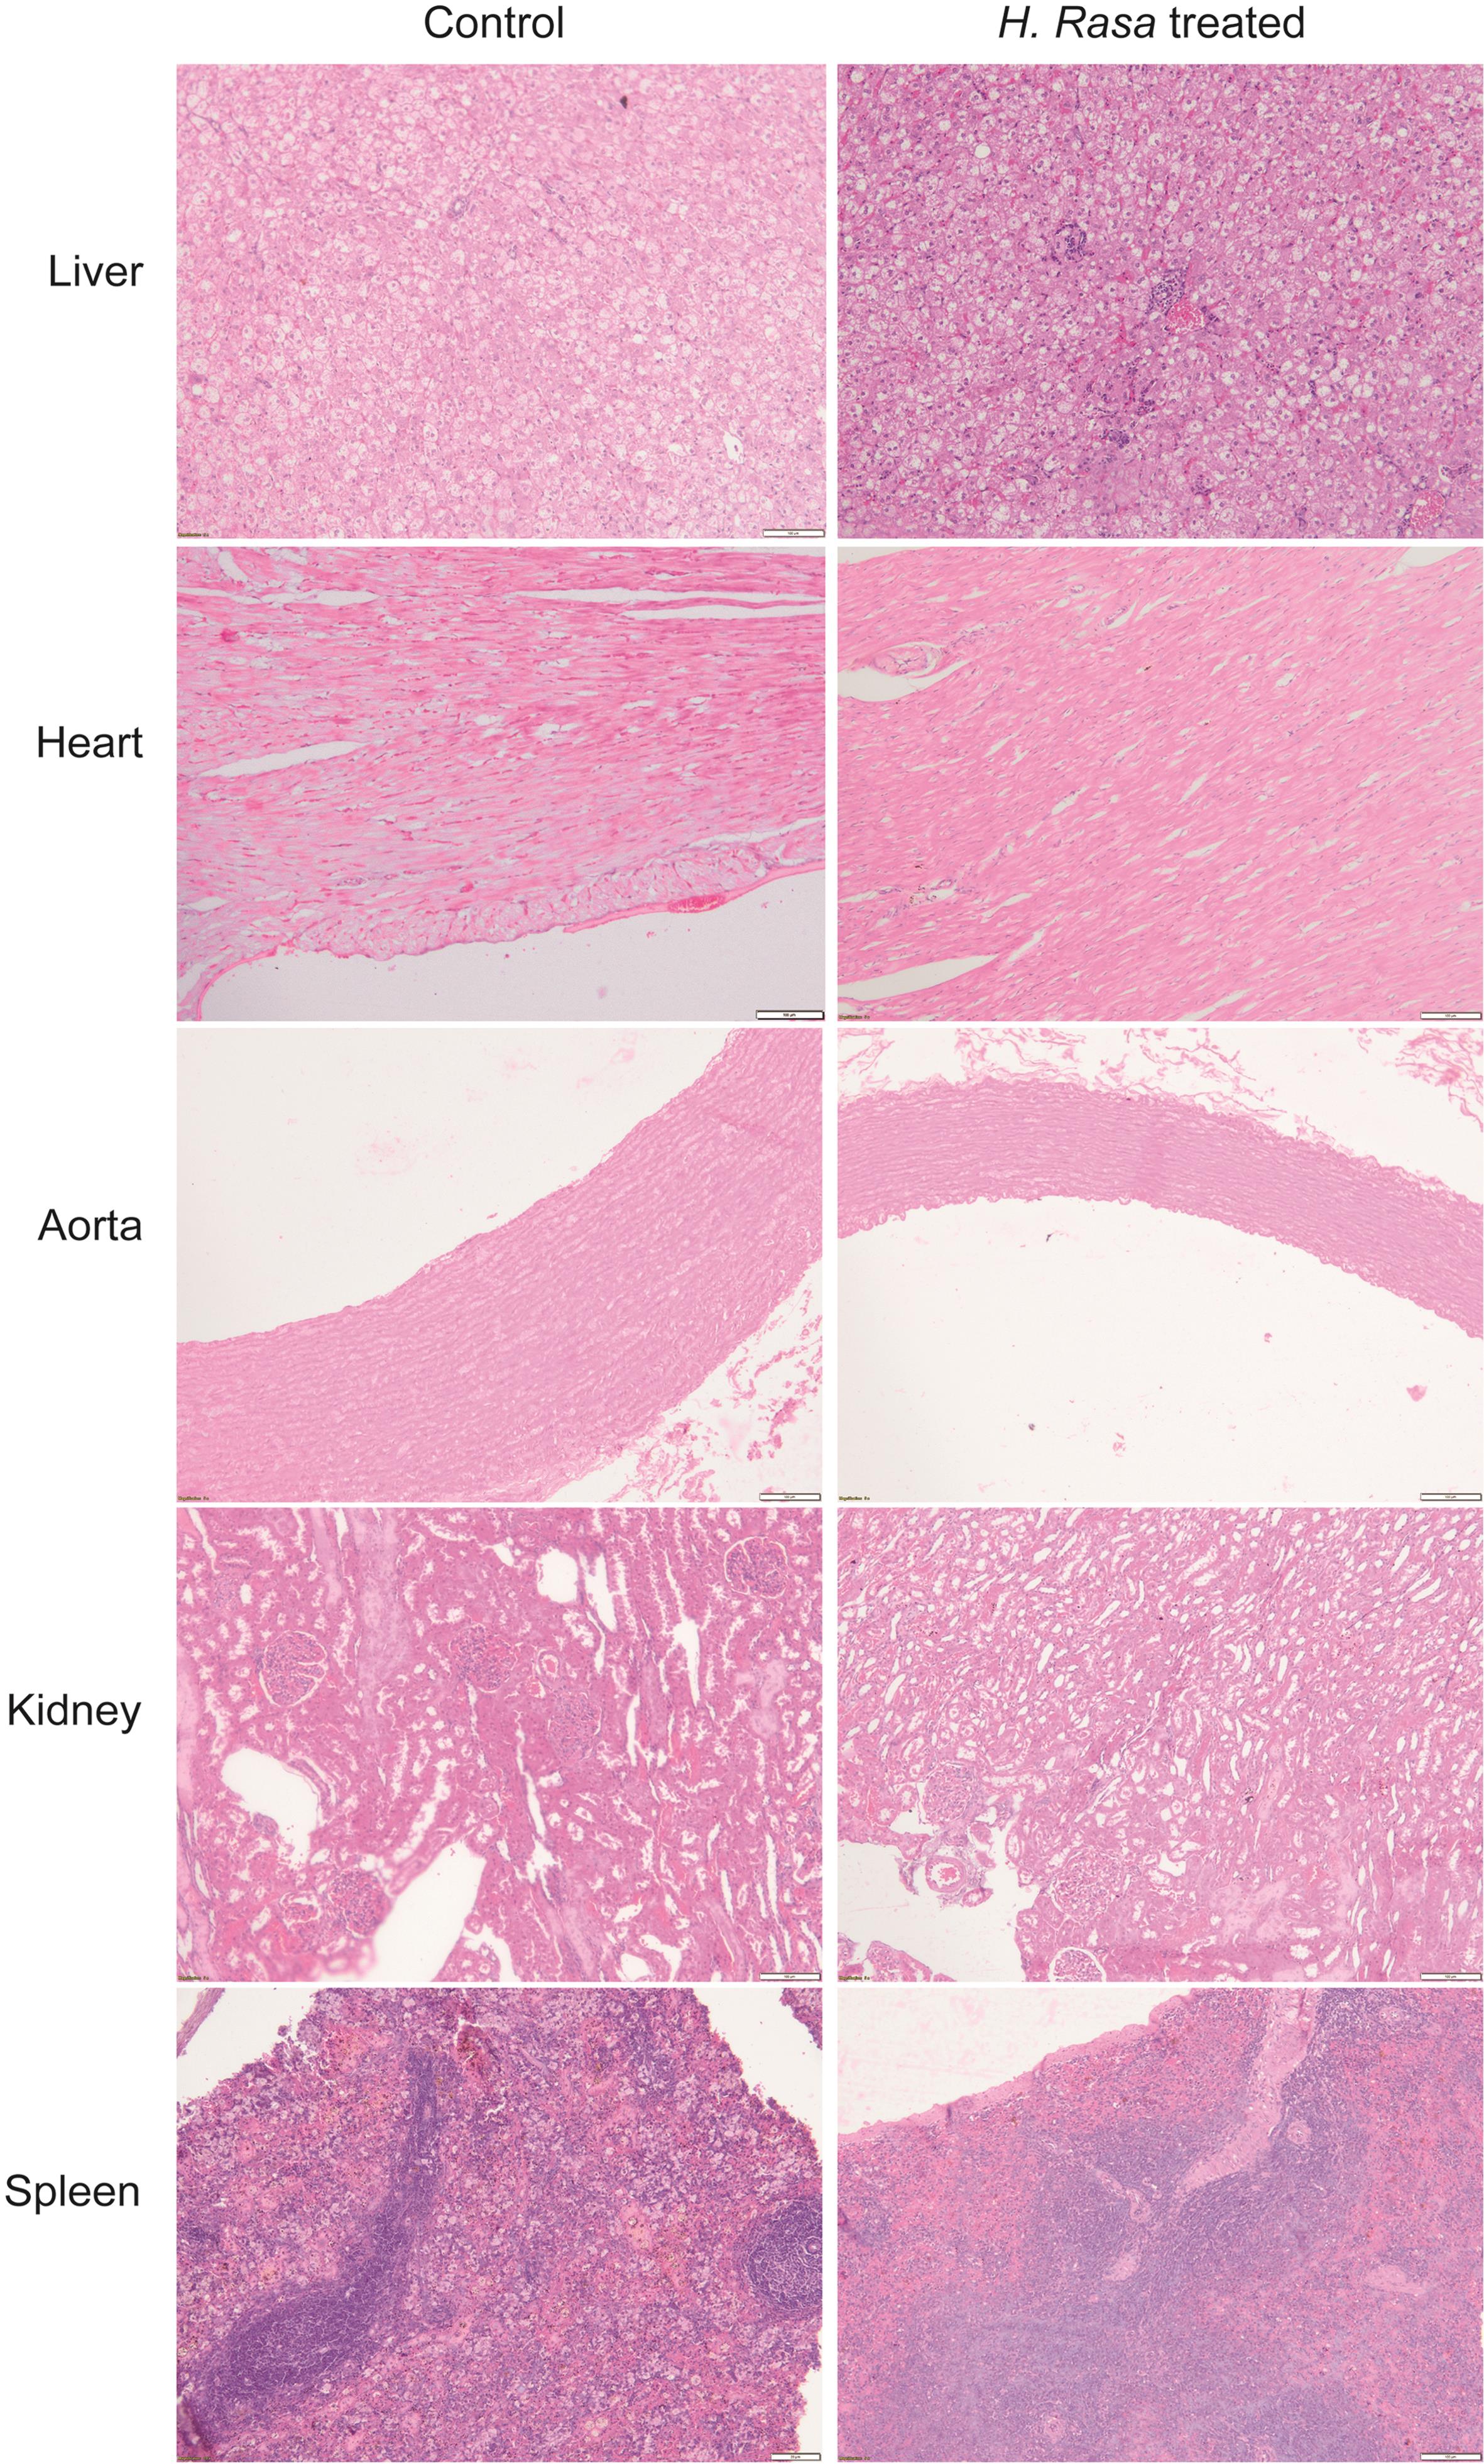 Histopathological findings of major organs in control and high dose of <italic>H. Rasa</italic> treated groups (10 × 10X).